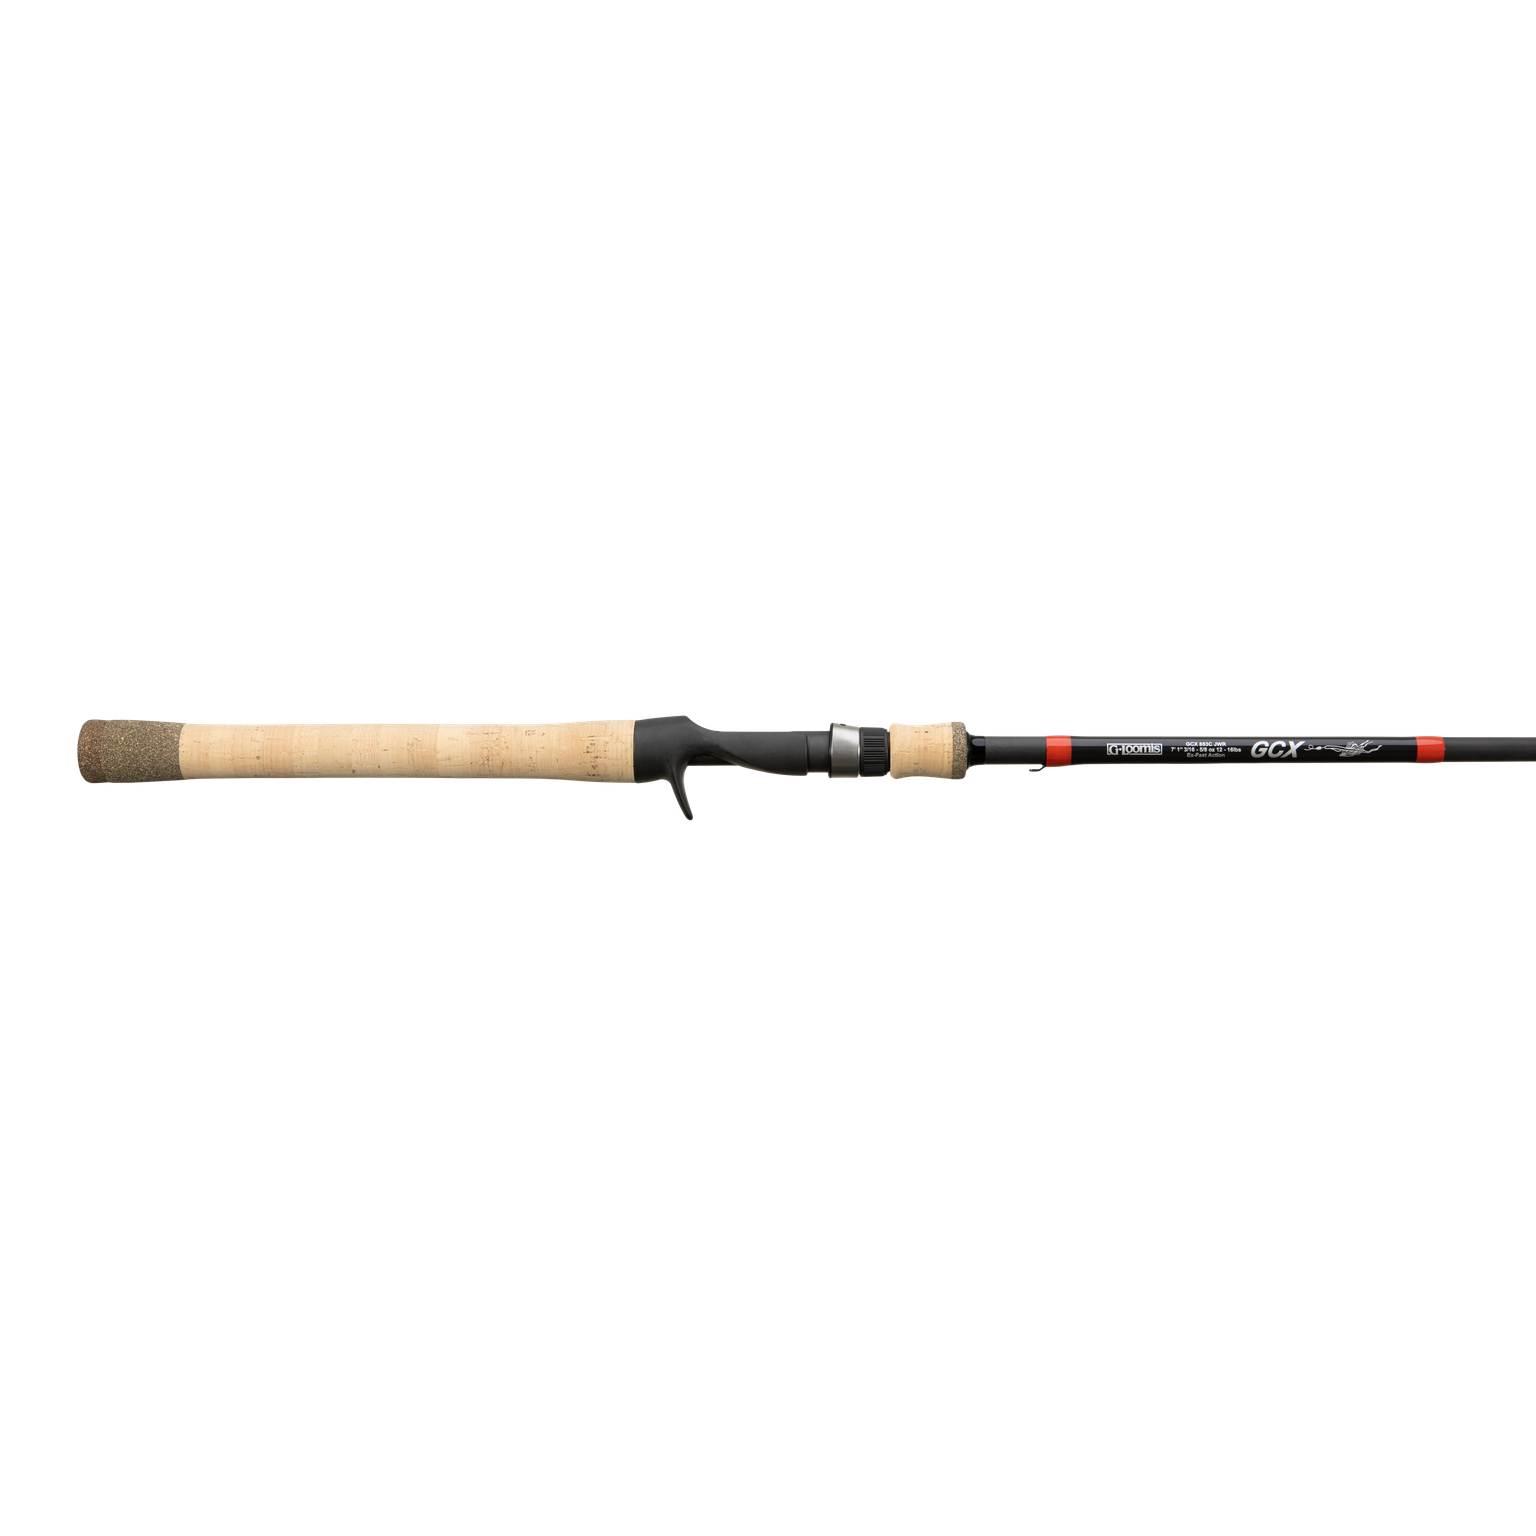 <p><strong><span>G.Loomis GCX Rods </span></strong><span></span></p><p><span>Handcrafted in Woodland, Wash., the new G. Loomis GCX blends graphite of different modulus with impact-resistant resin materials to create a series of bass rods designed to maximize lure presentation, rod and reel performance for specific techniques. New SeaGuide RA ceramic ring inserts are 30% harder, with 60% more impact resistance than traditional aluminum oxide rings, while also weighing 13% less. Multi-Taper Design technology enhances durability while further decreasing the blankâs weight. A series of âmicro tapersâ within the overall taper of the rod, the exclusive Multi-Taper Design process enables rod engineers to use more material on potential stress points and less material everywhere else. The result is a broad library of precisely defined rod lengths, powers, and actions that strike the perfect balance between durability and performance. $249.99-$279.99. <a href=